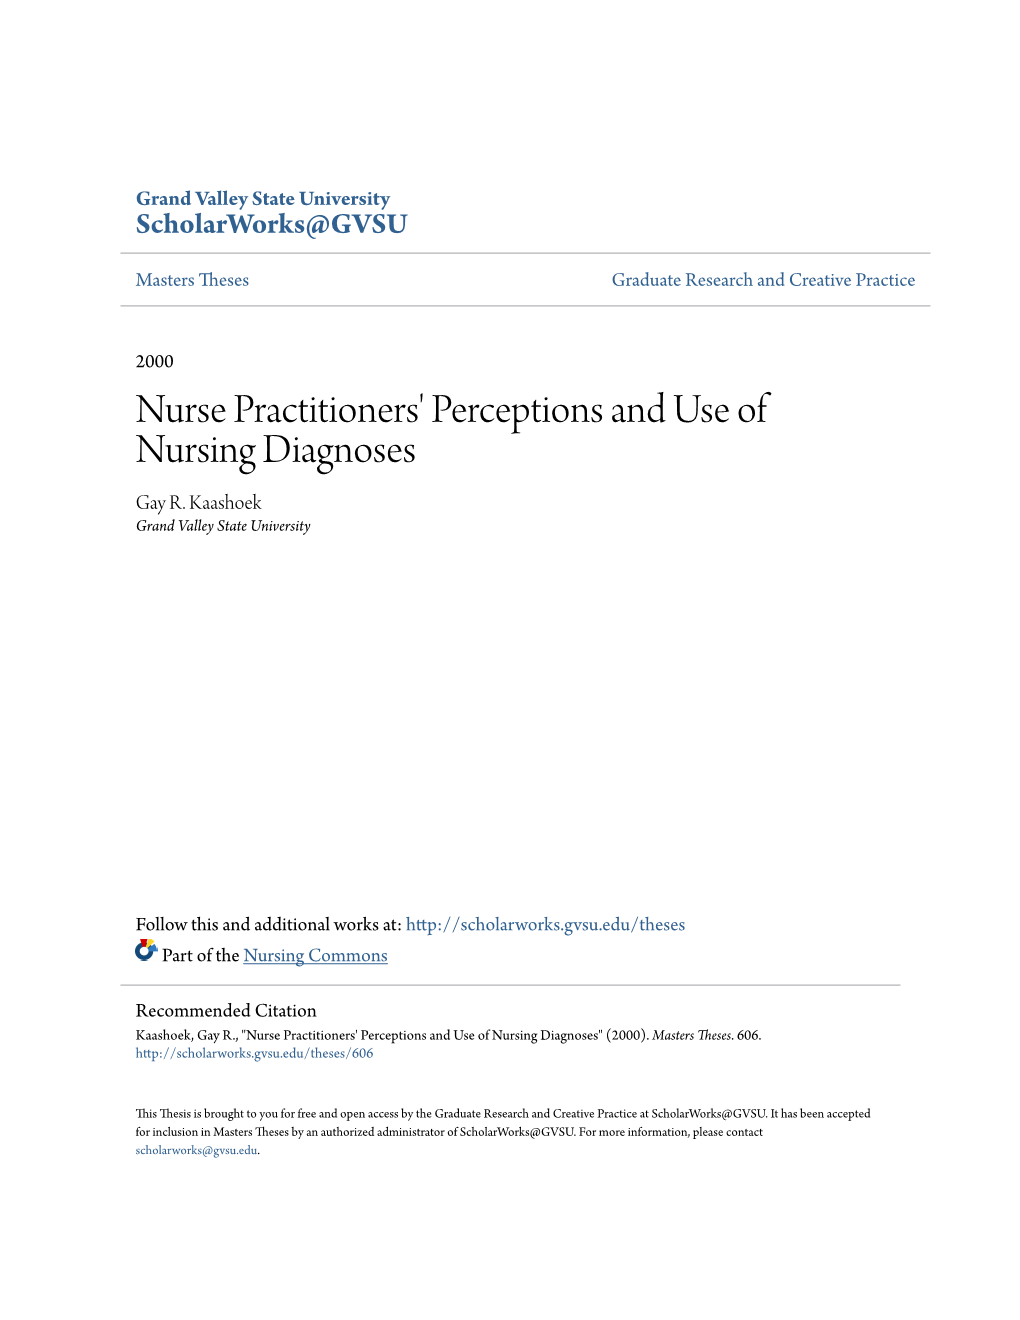 Nurse Practitioners' Perceptions and Use of Nursing Diagnoses Gay R